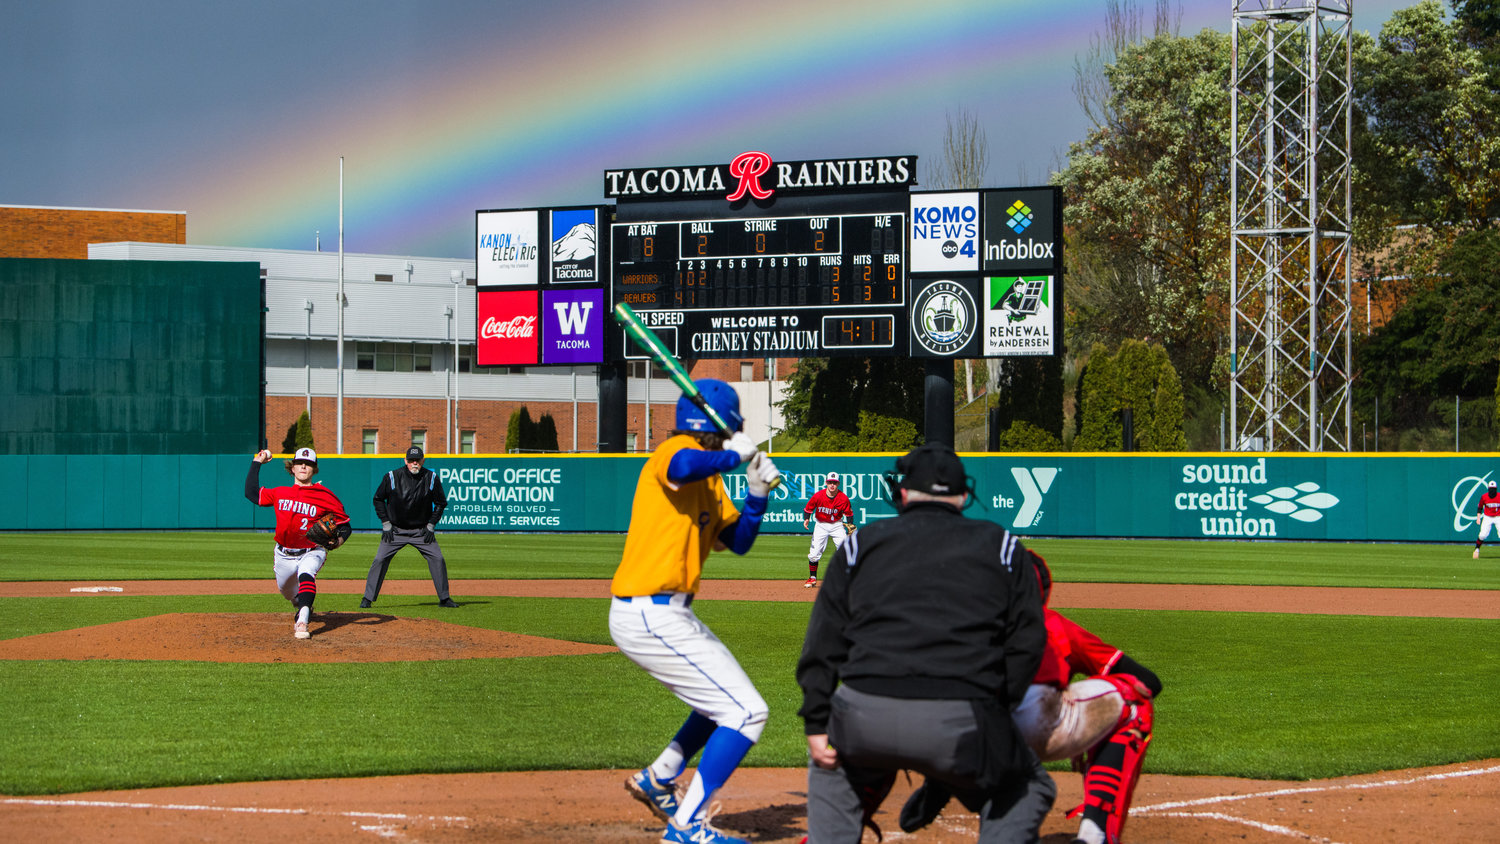 Tenino’s Cody Strawn (2) throws a pitch to Rochester’s Hyde Parrish (8) as a rainbow forms over Cheney Stadium, home of the Tacoma Rainiers, on April 1.